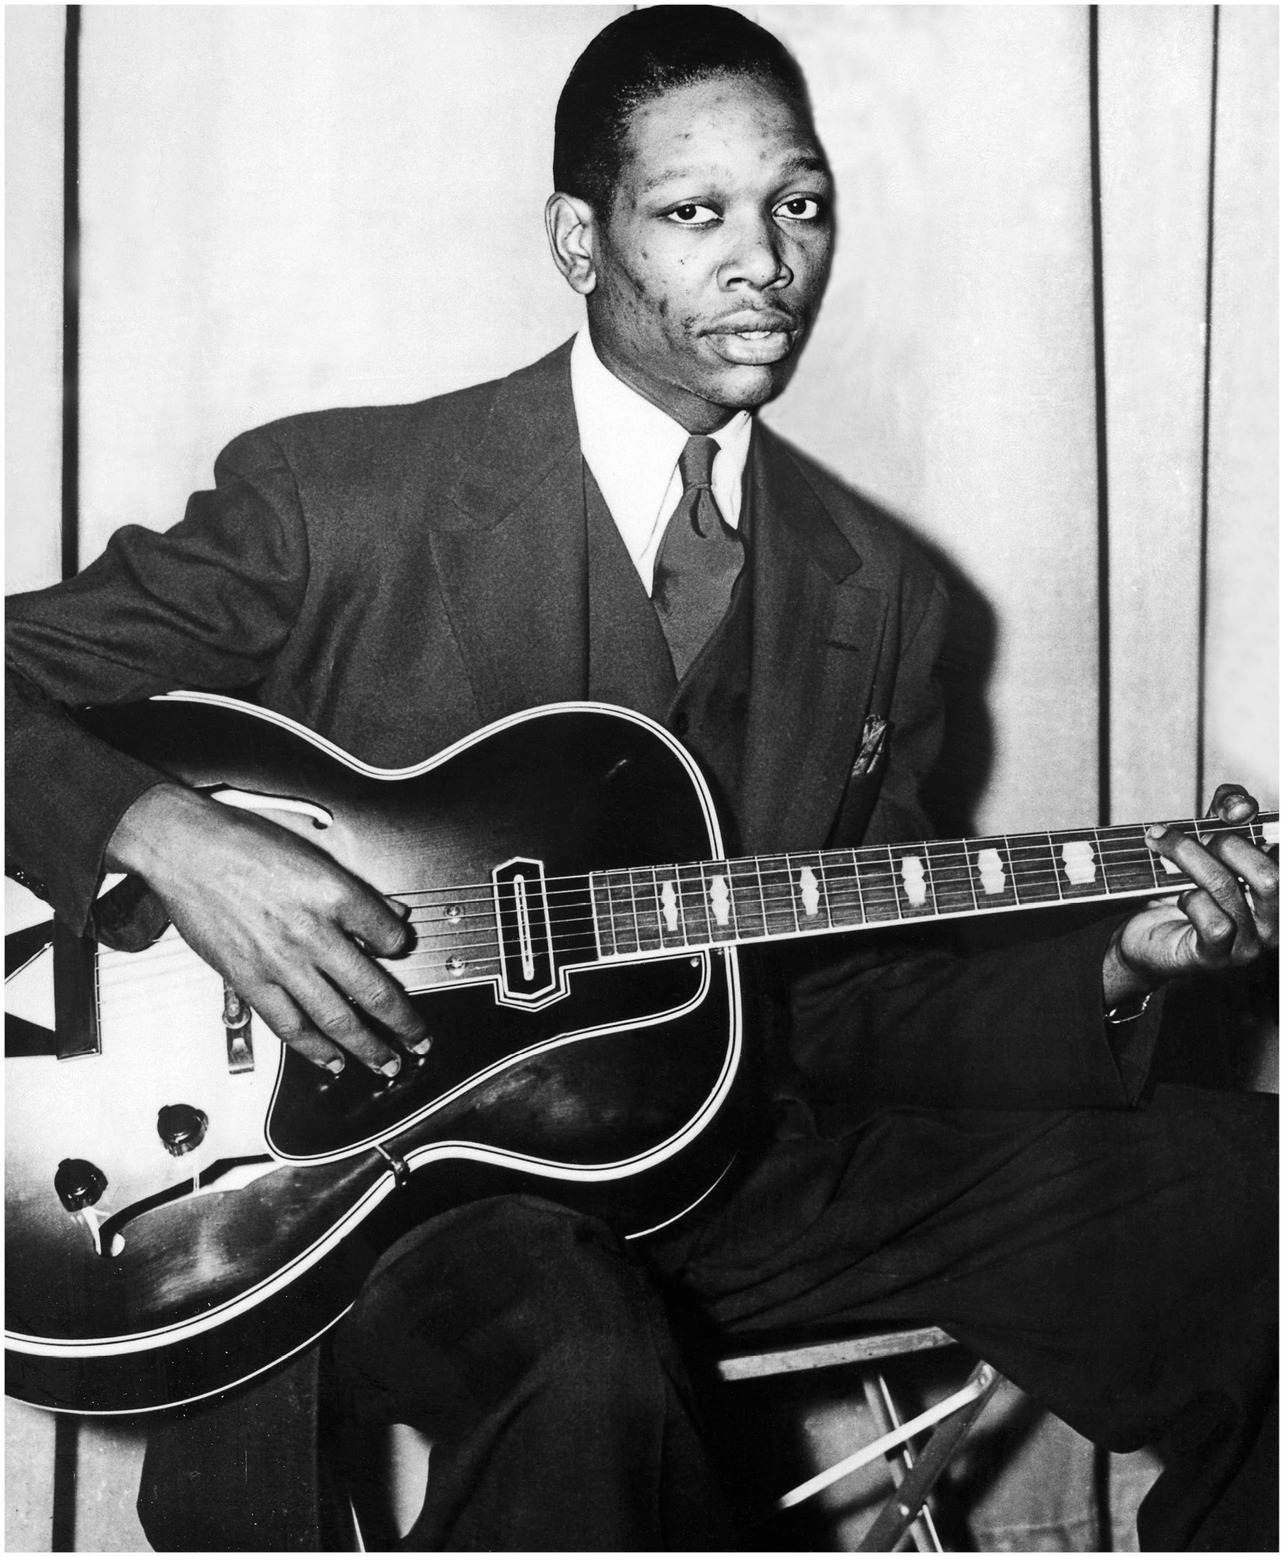 UNSPECIFIED - JANUARY 01:  DENMARK OUT  Photo of Charlie CHRISTIAN; playing guitar, c.1940  (Photo by JP Jazz Archive/Redferns)